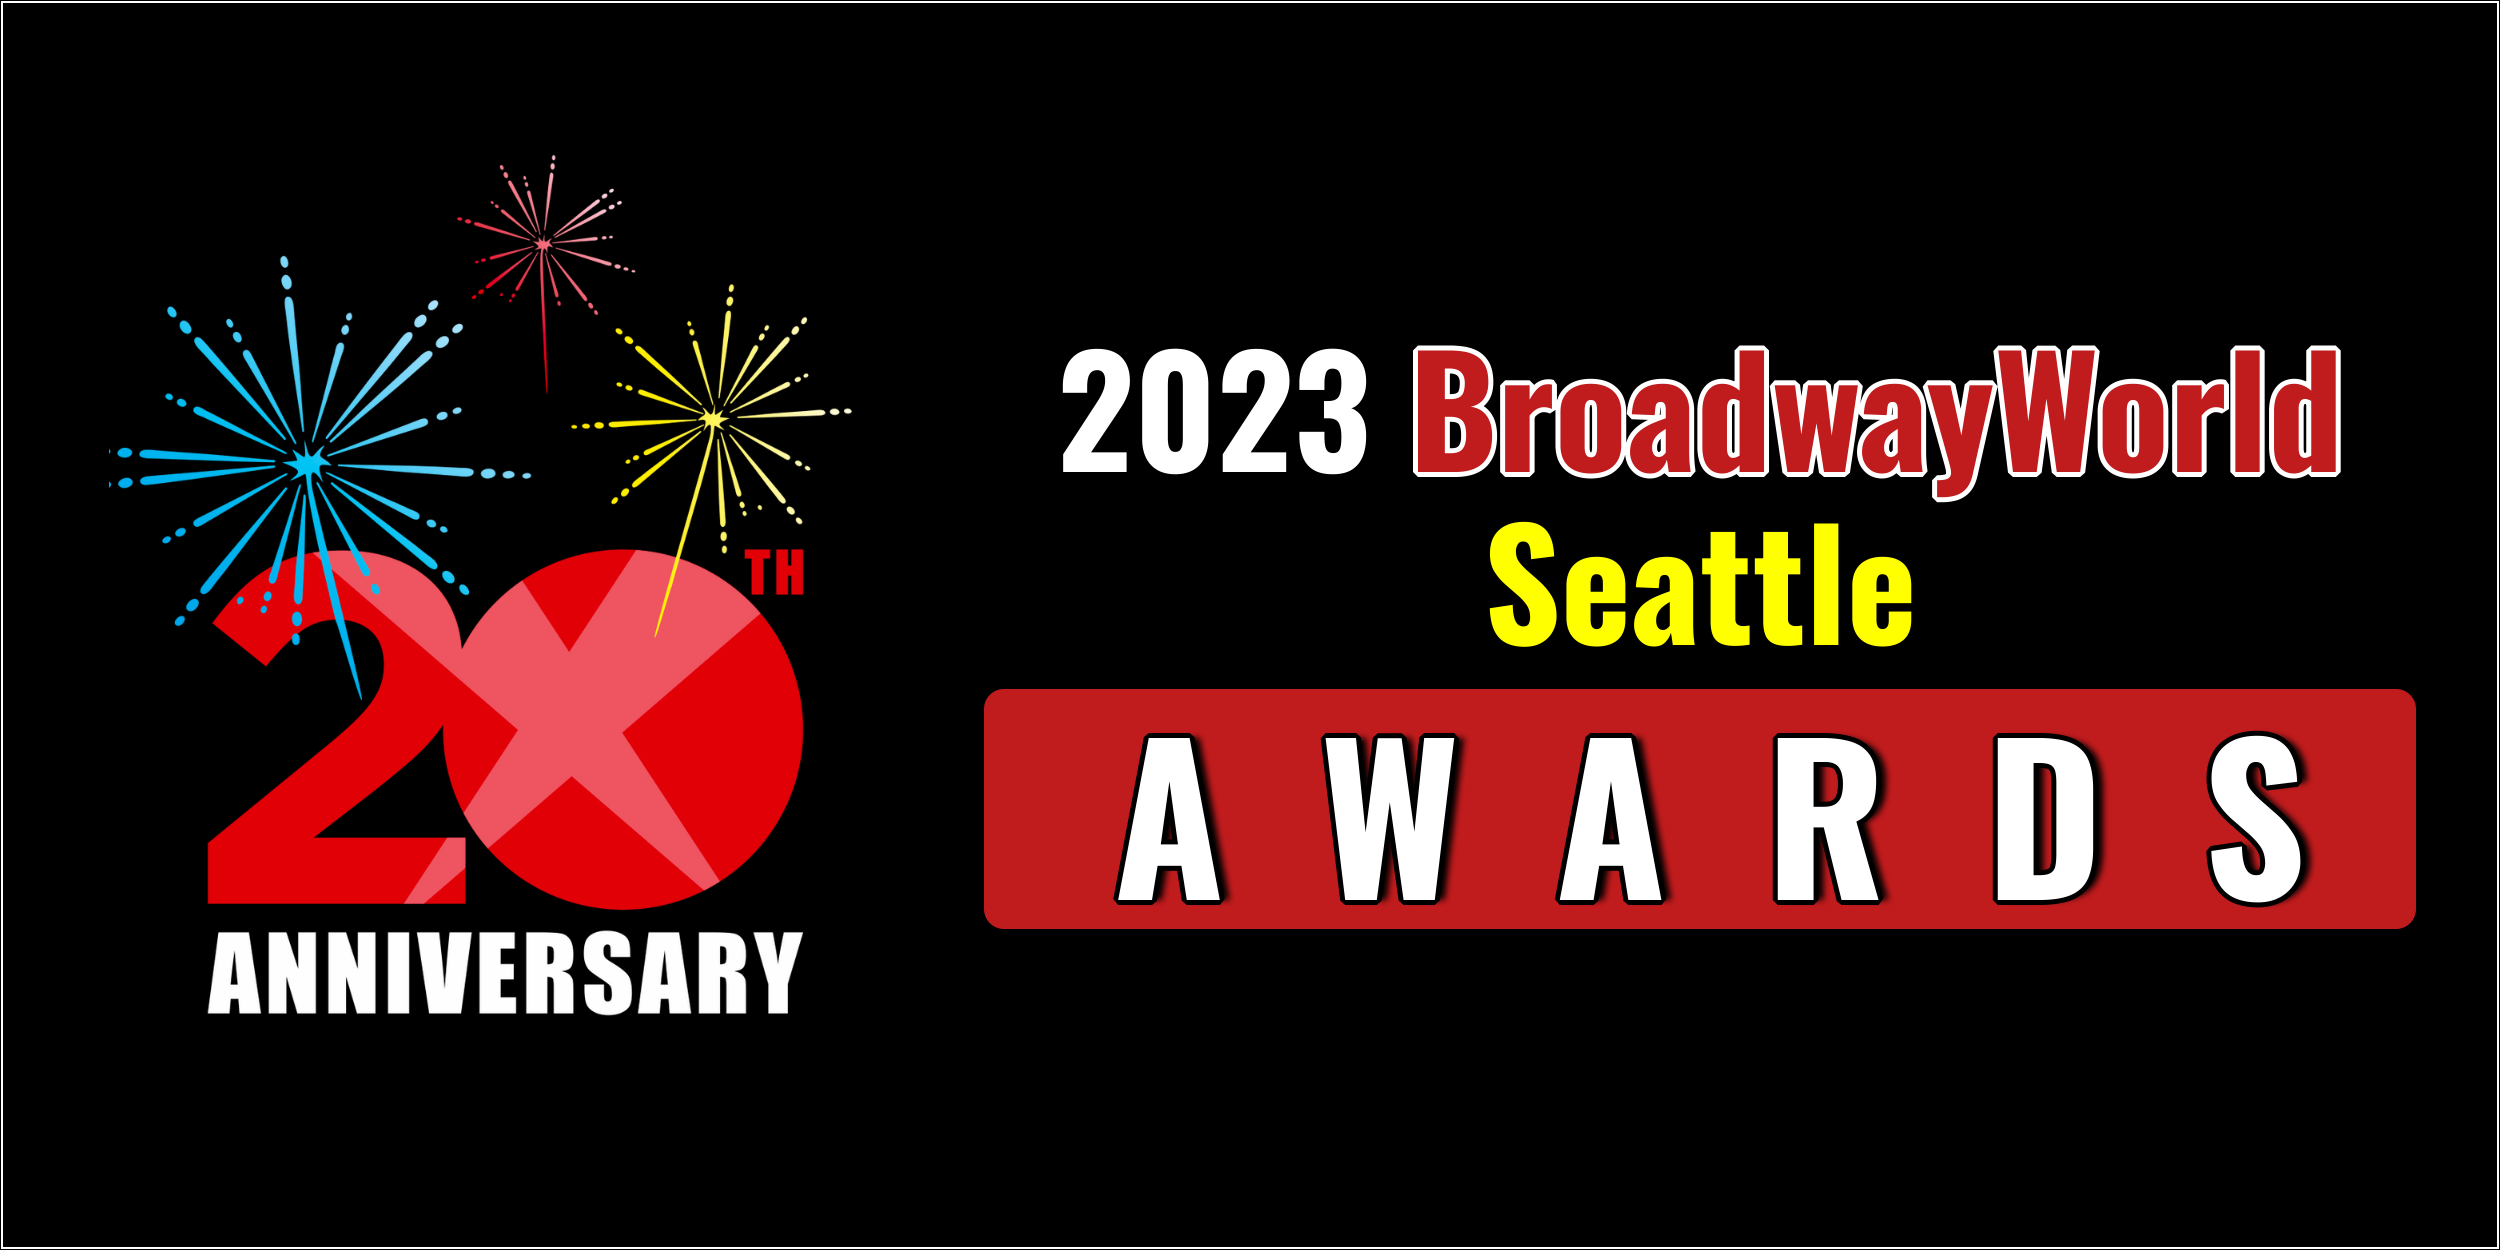 Latest Standings Announced For The 2023 BroadwayWorld Seattle Awards; AGATHA CHRISTIE’S  Photo